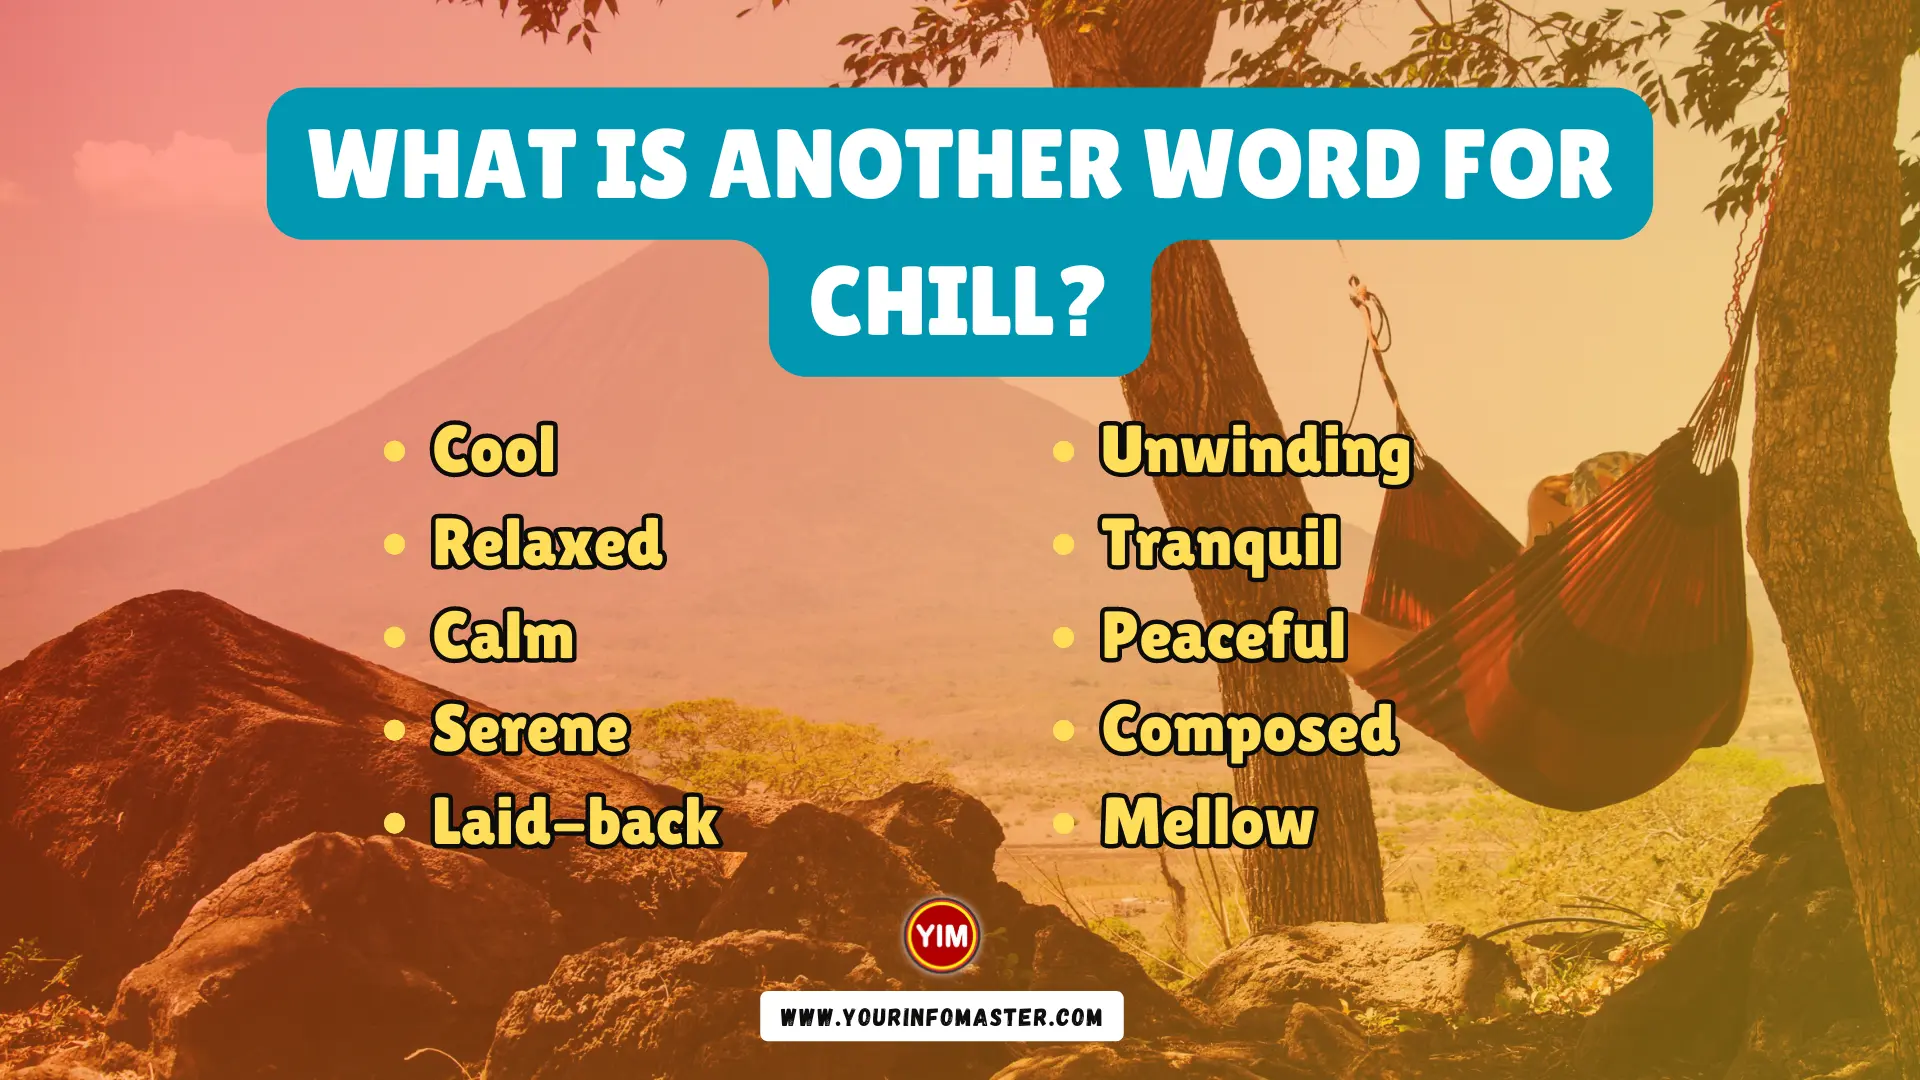 What is another word for Chill